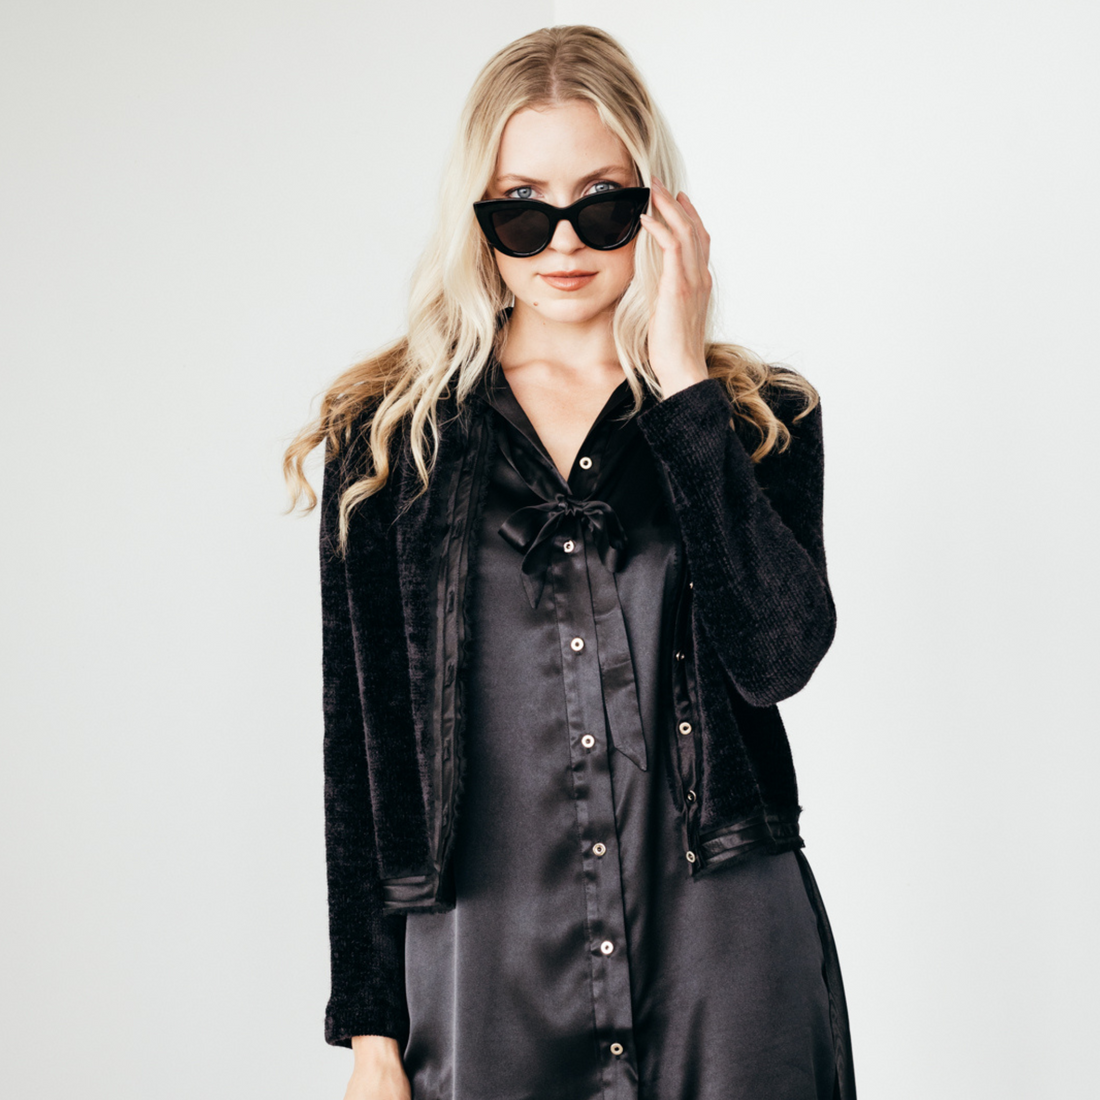  black button up mary sweater with frayed chiffon and sateen detail at the center front and hem by inlarkin